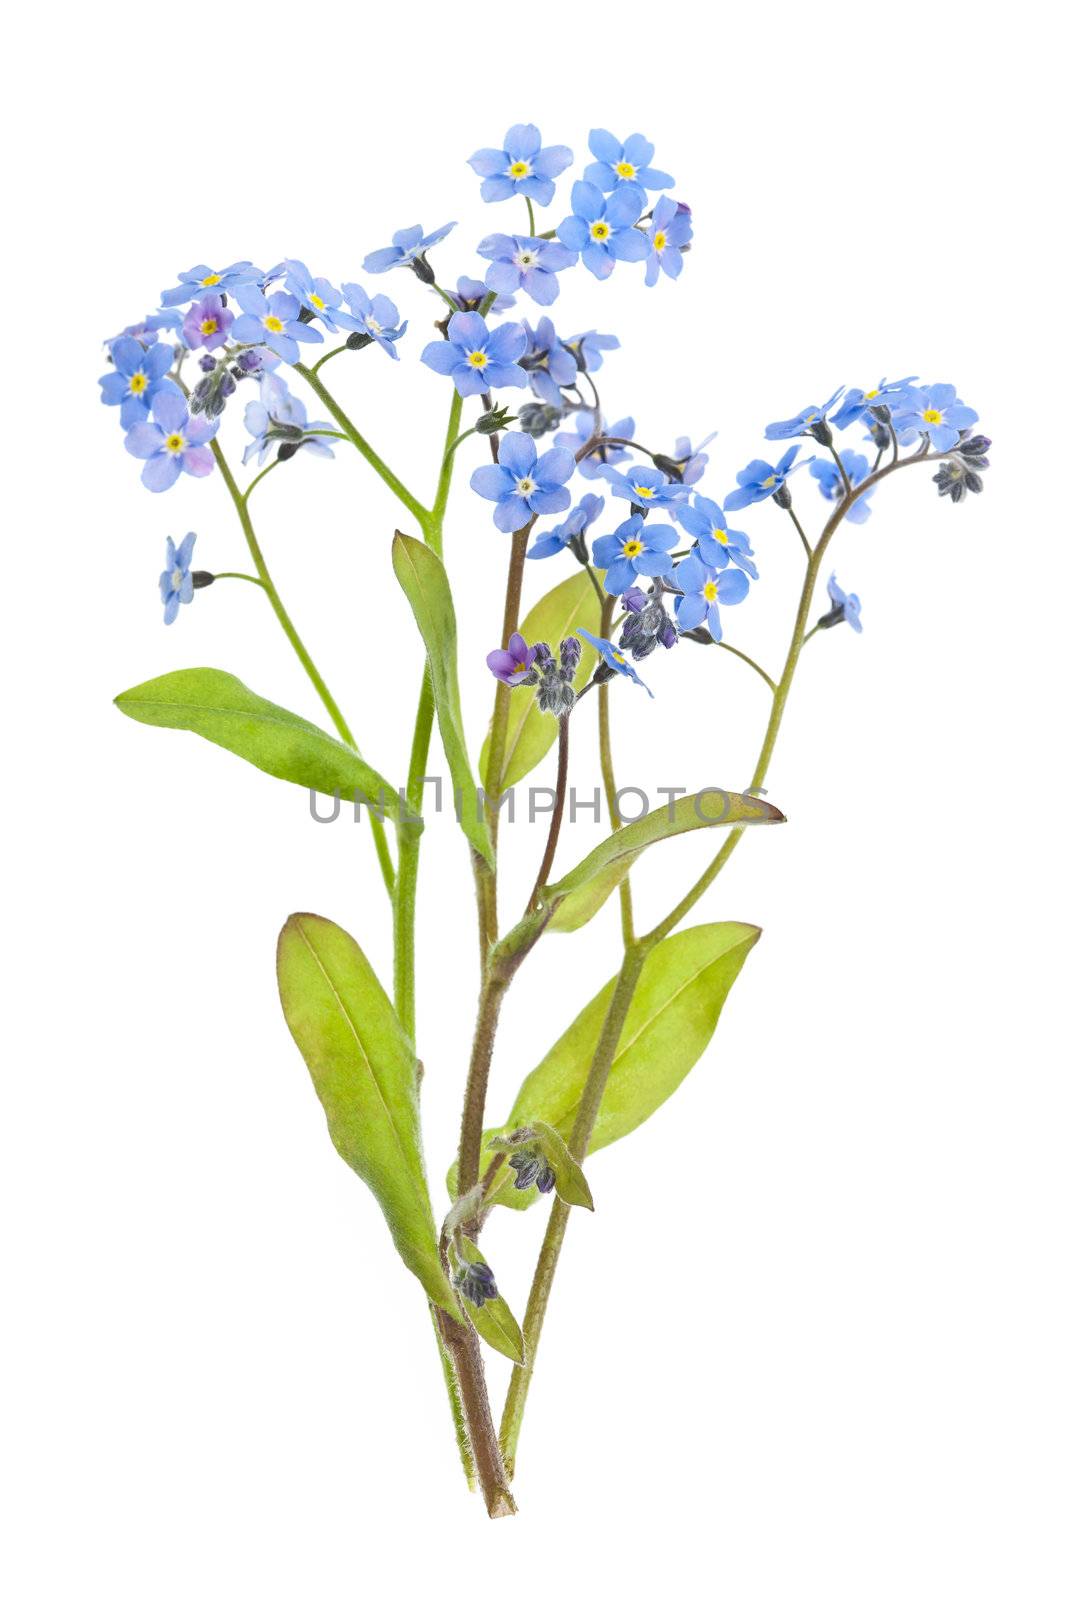 Arrangement of forget-me-not flowers with leaves isolated on white background